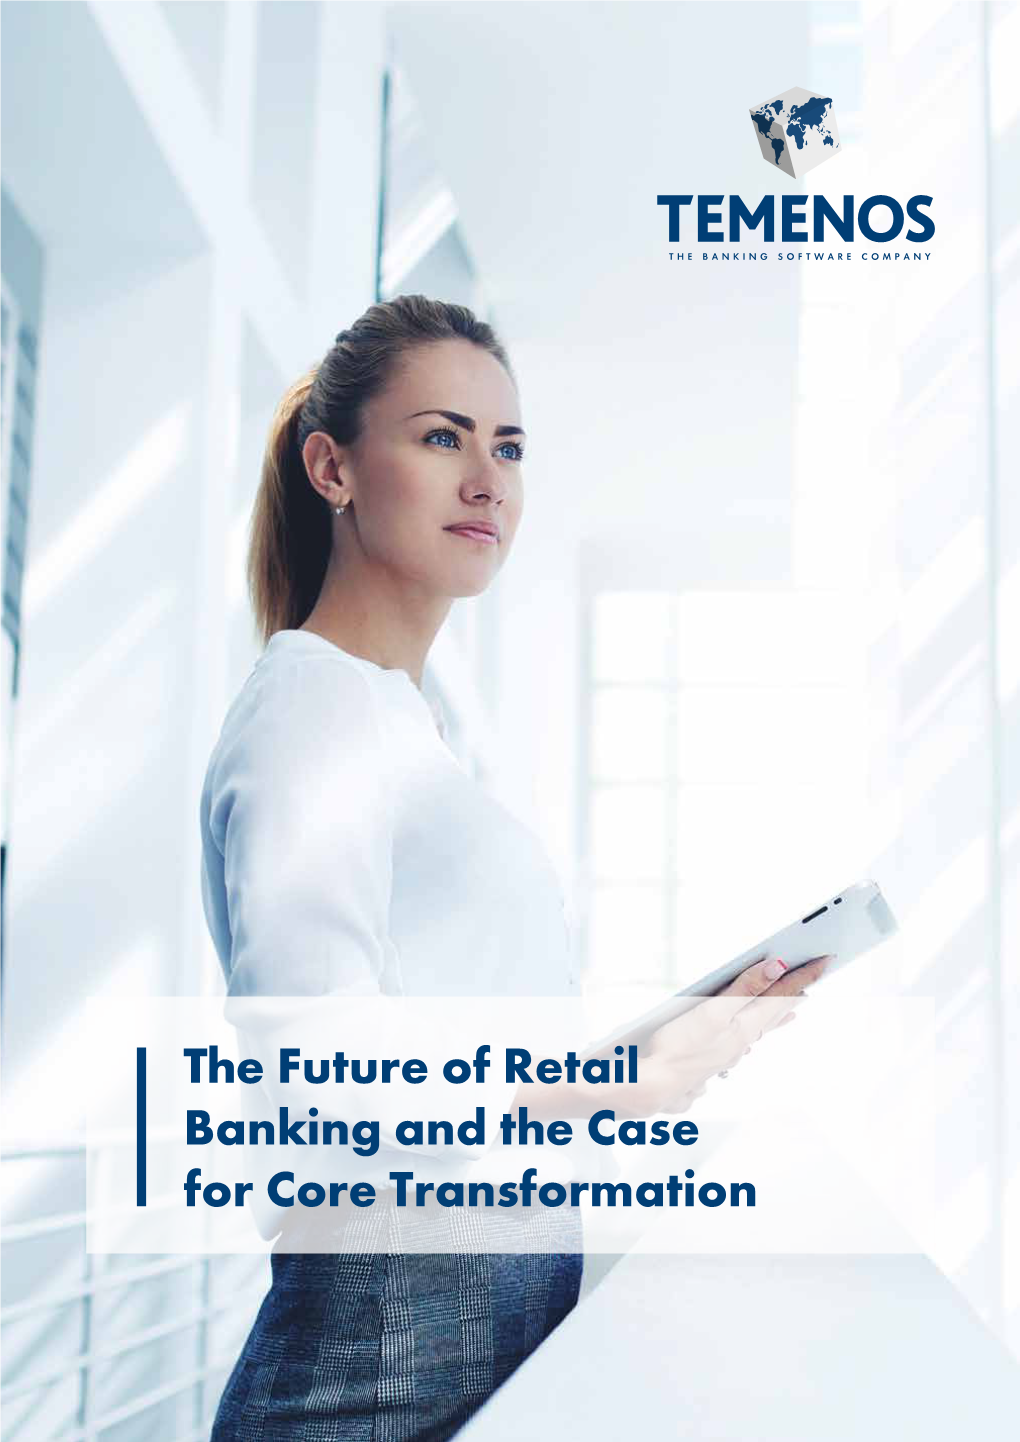 The Future of Retail Banking and the Case for Core Transformation Contents Introduction